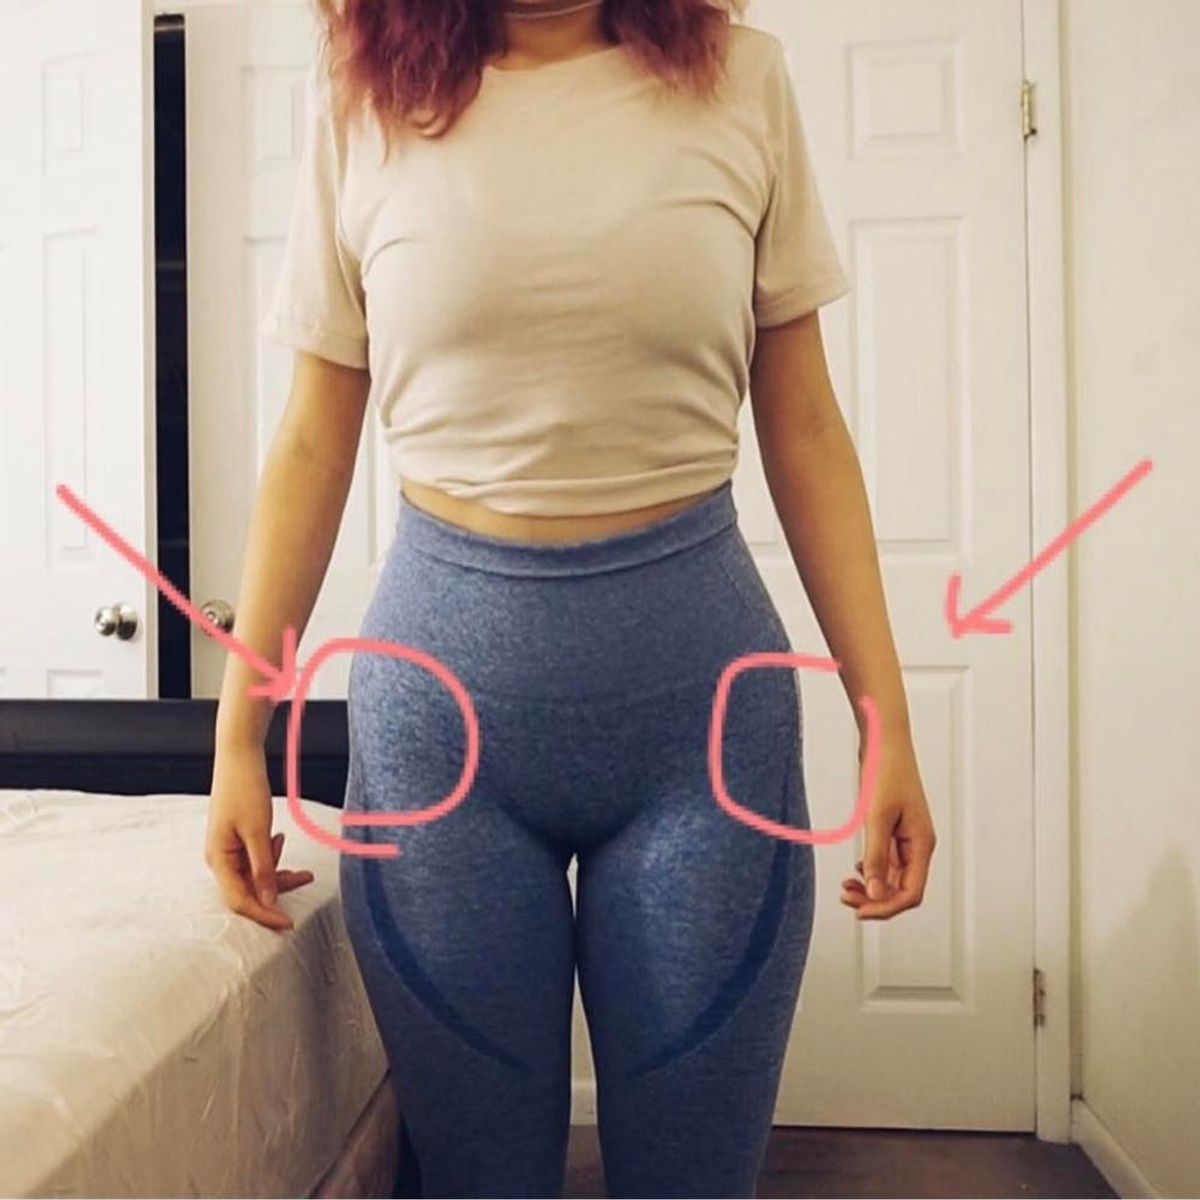 Hip Dips Are Latest Body Positive Trend to Sweep the Internet